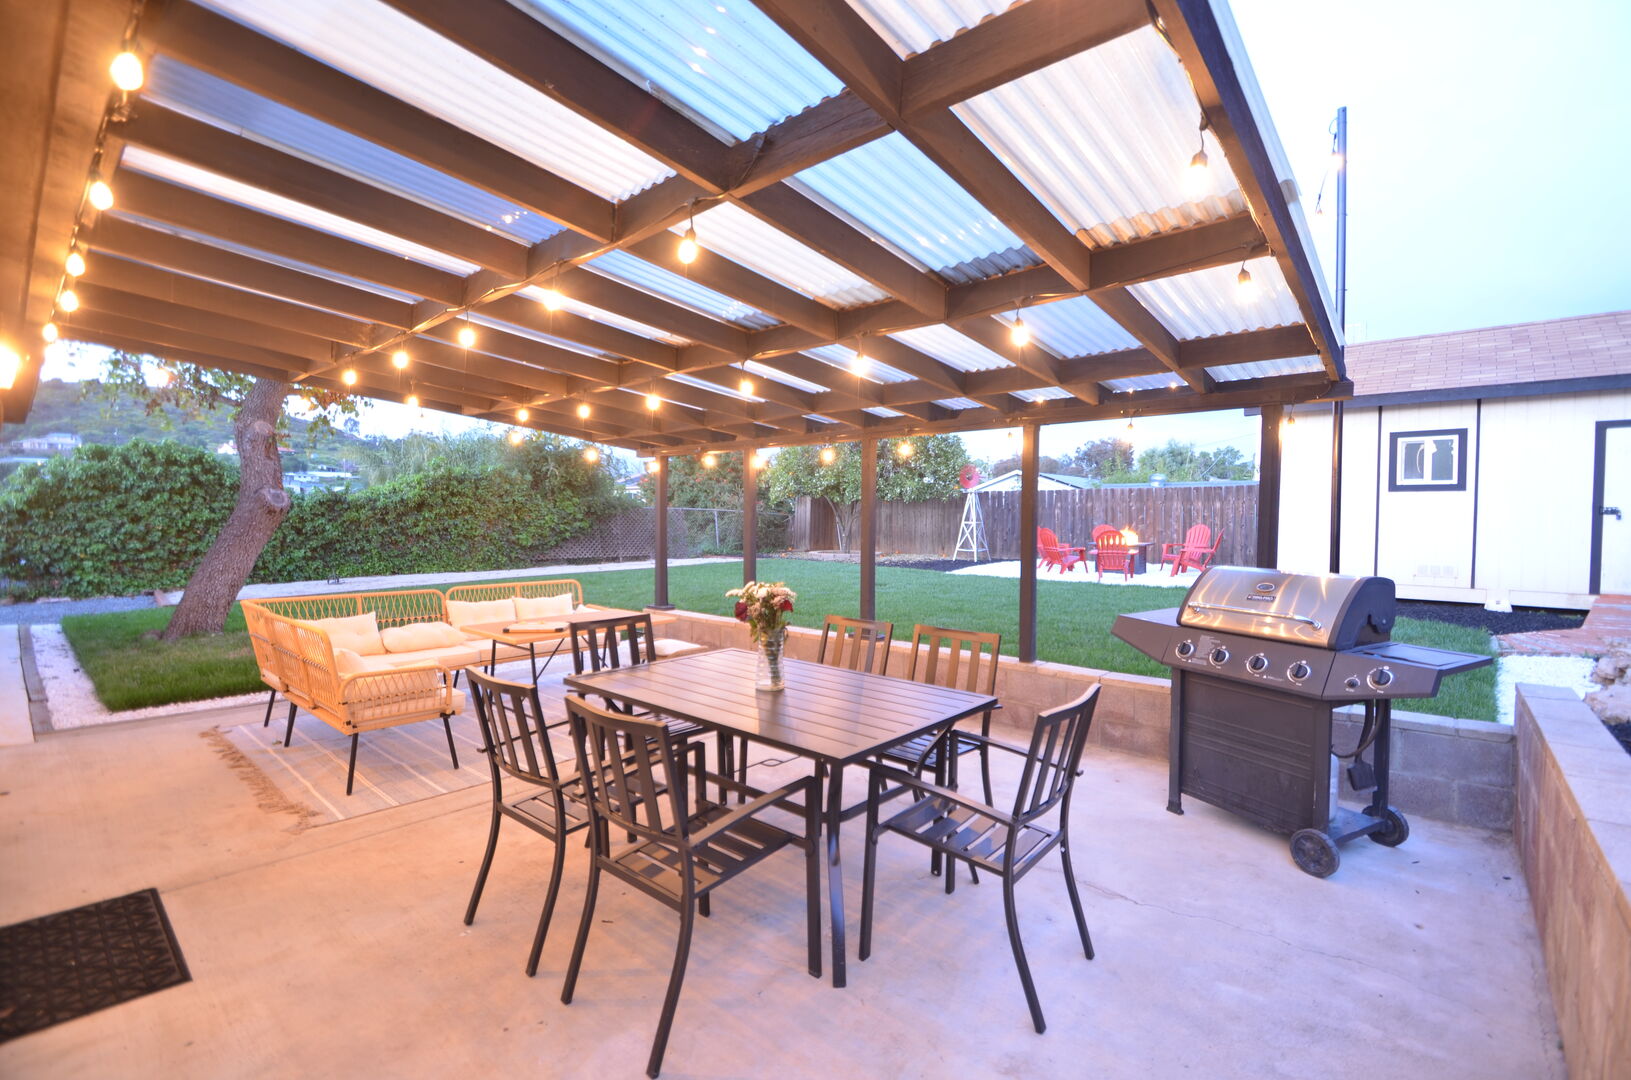 Covered patio with dining, lounge chairs and propane grill